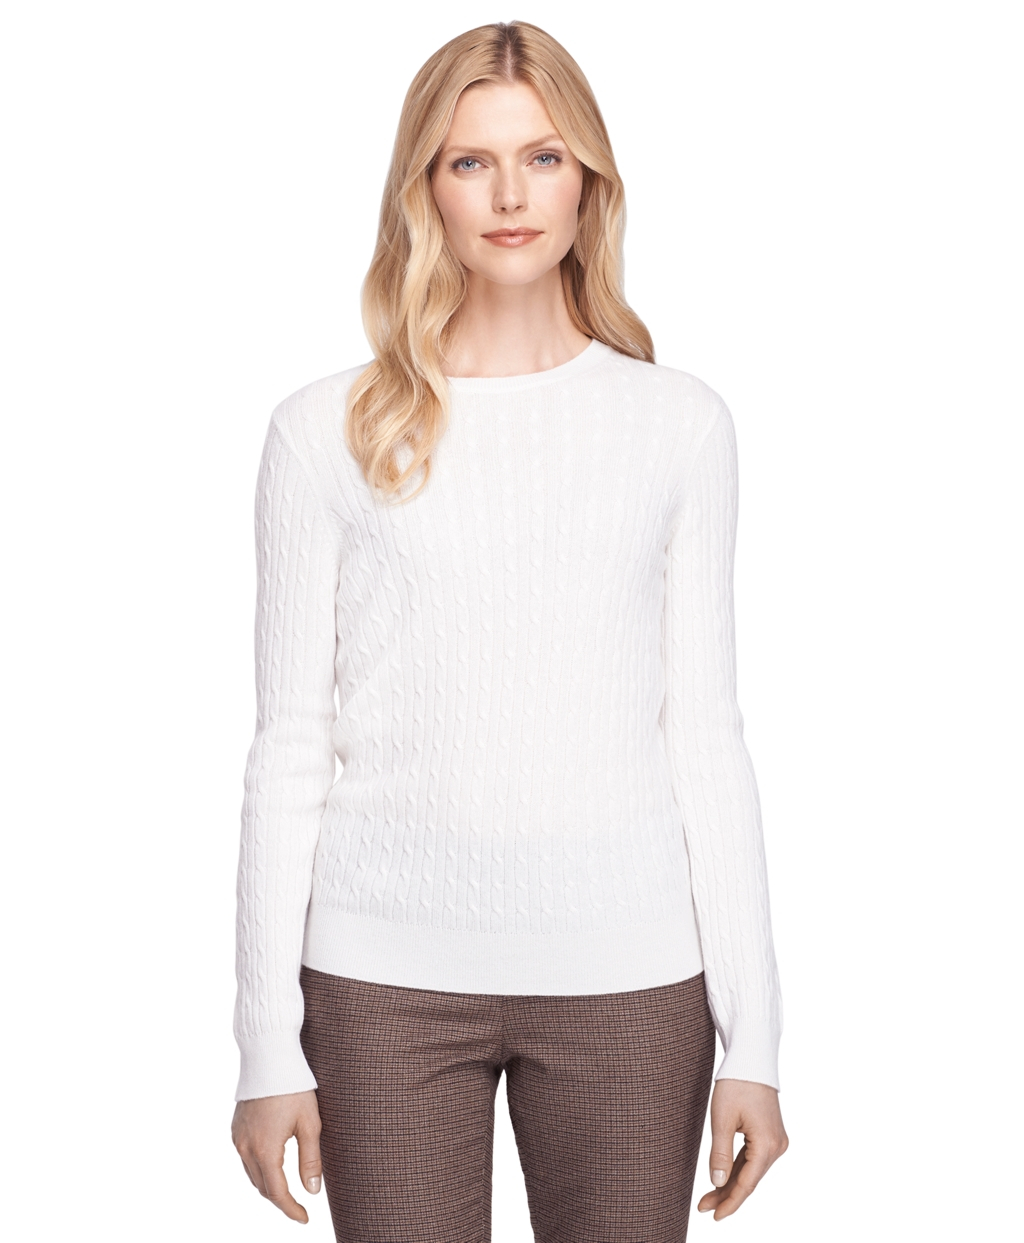 Lyst - Brooks Brothers Cashmere Cable Knit Crewneck Sweater in White